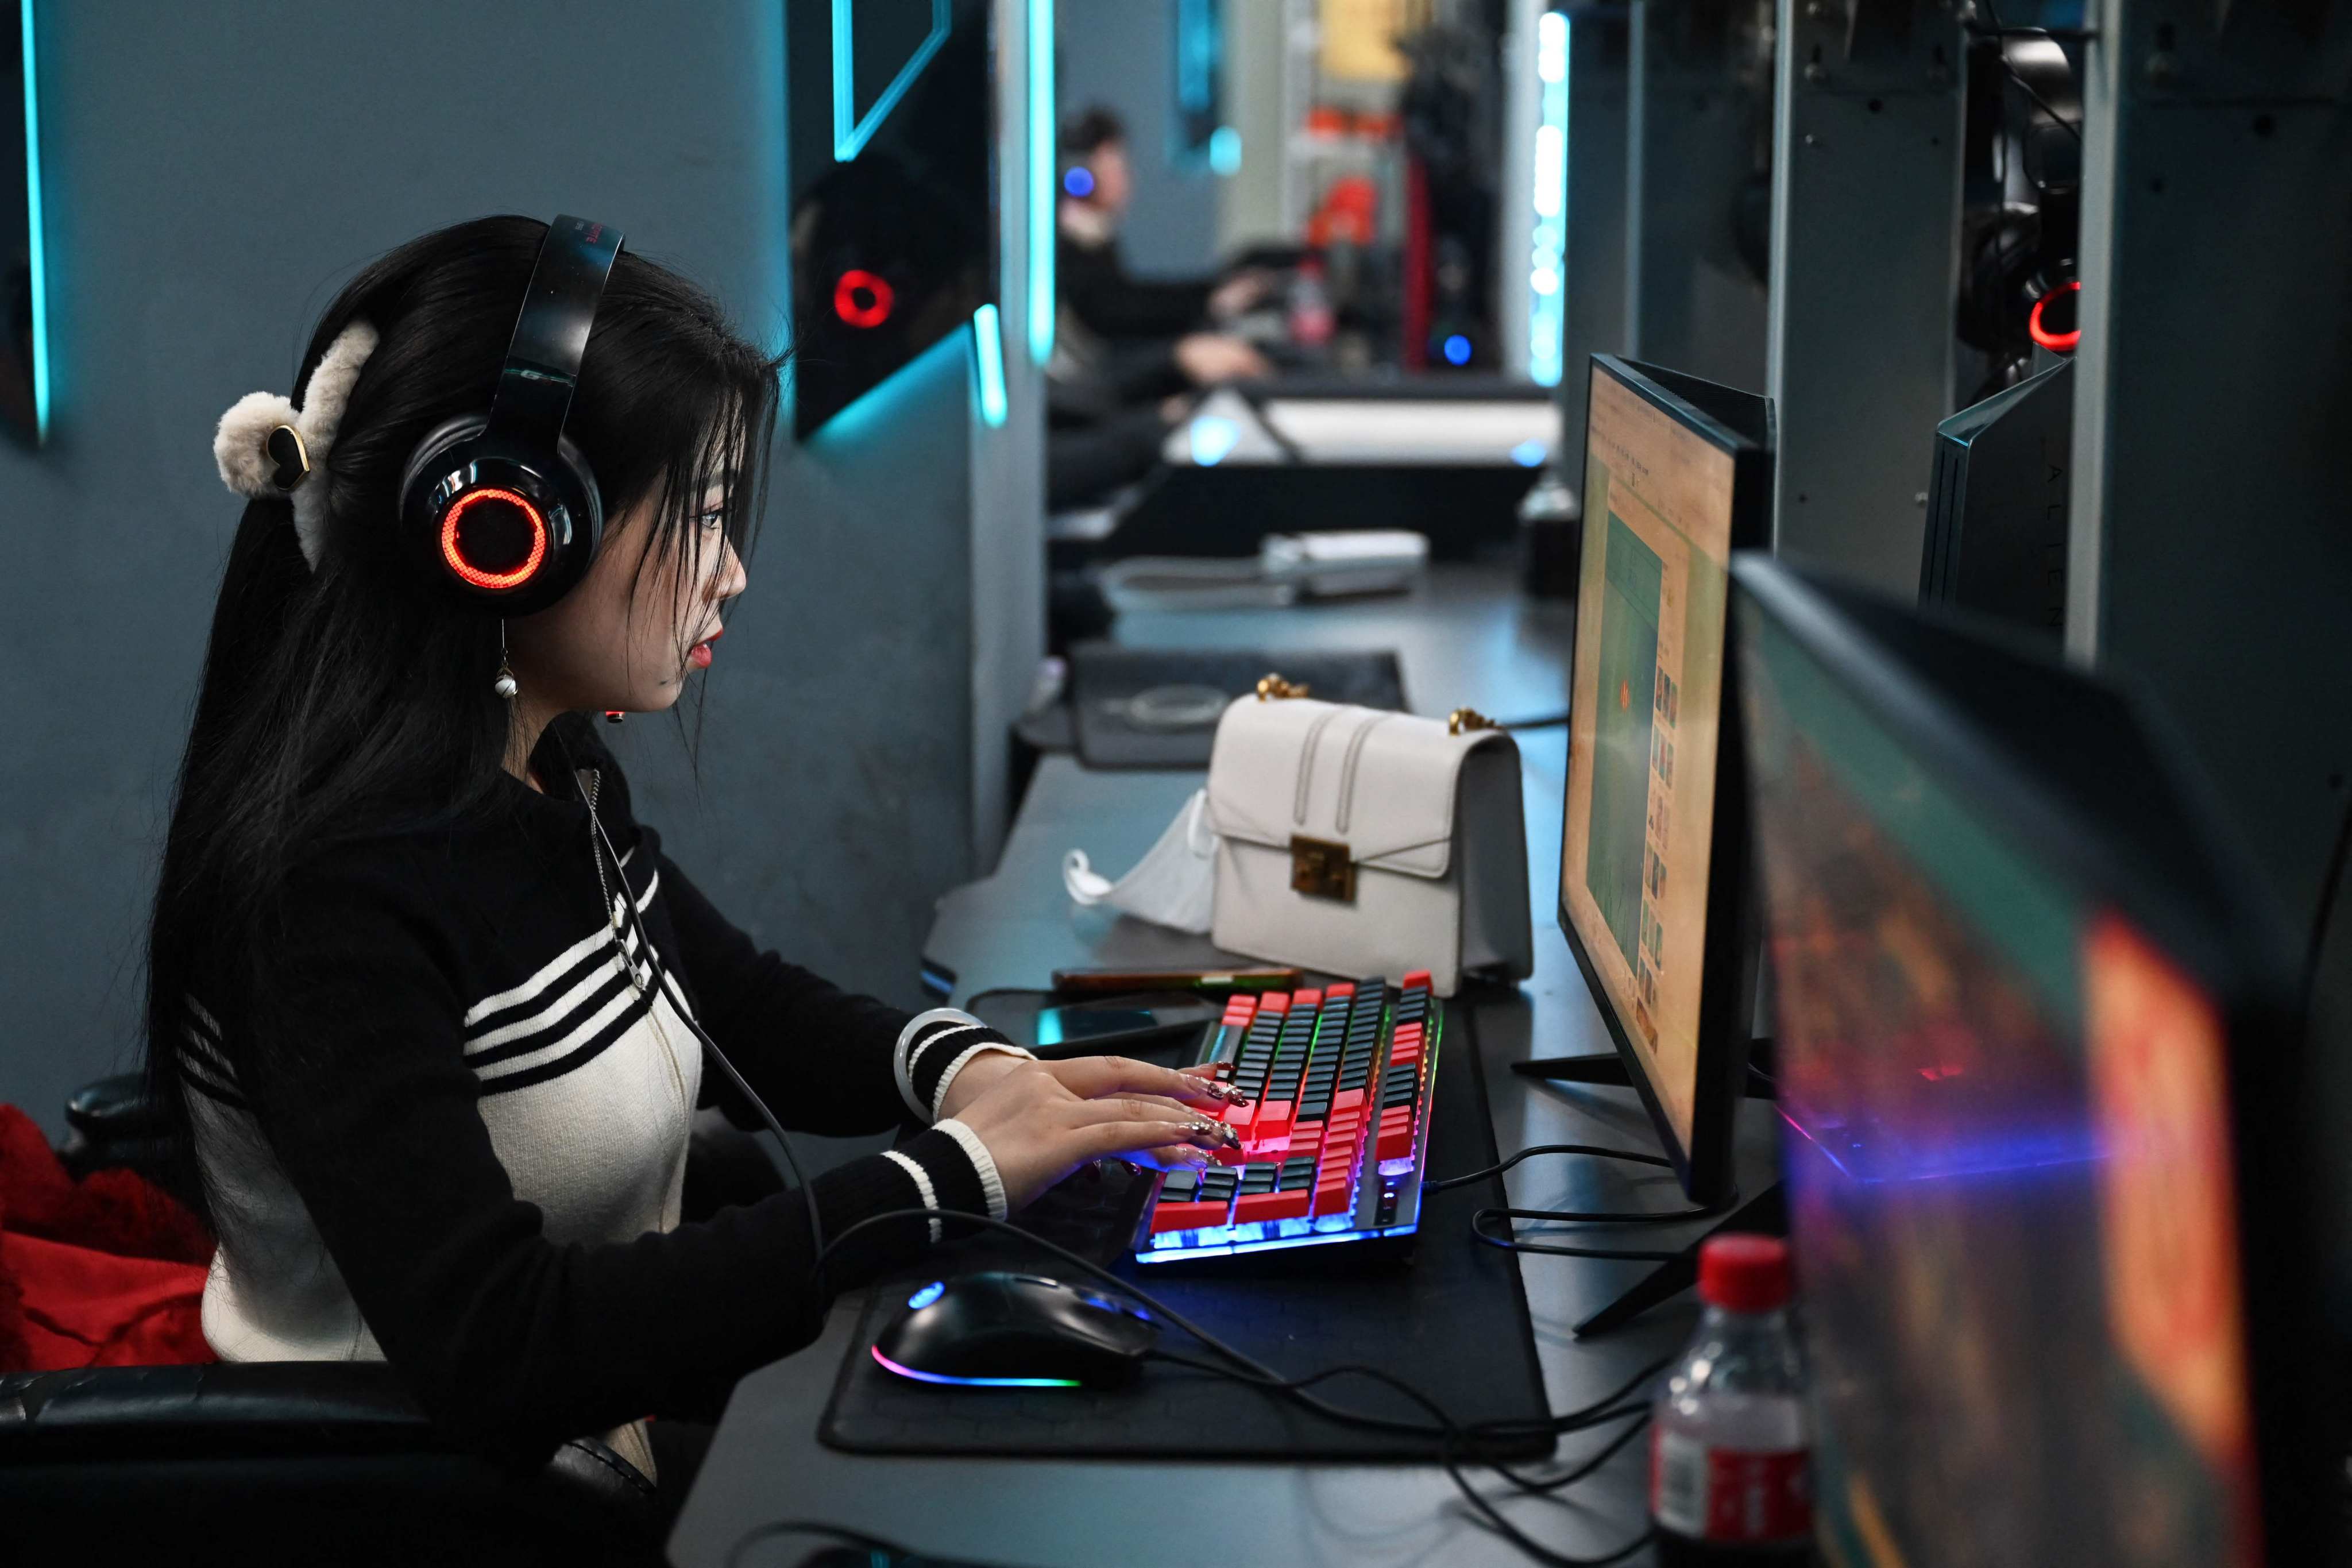 A woman plays a game at an internet cafe in Beijing on January 26. The nature of the gaming industry and the perceptions surrounding it are changing. Photo: AFP